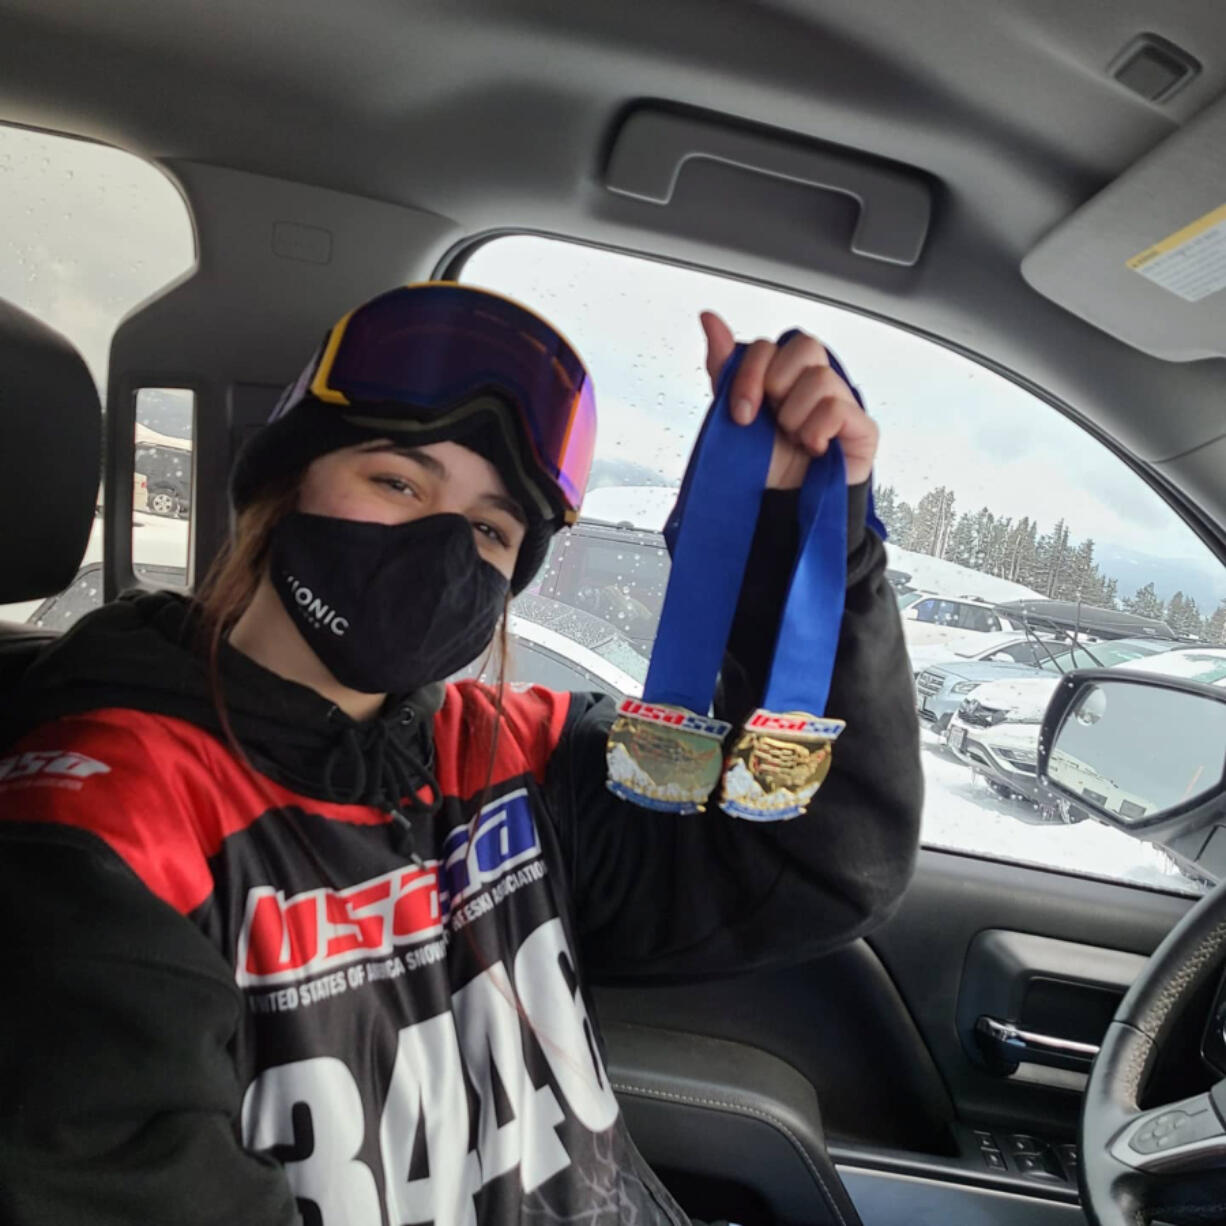 Zoe Smith of Camas holds medals she won on March 7 at a United States of America Snowboard and Freeski Association slopestyle  competition at Timberline on Mount Hood.